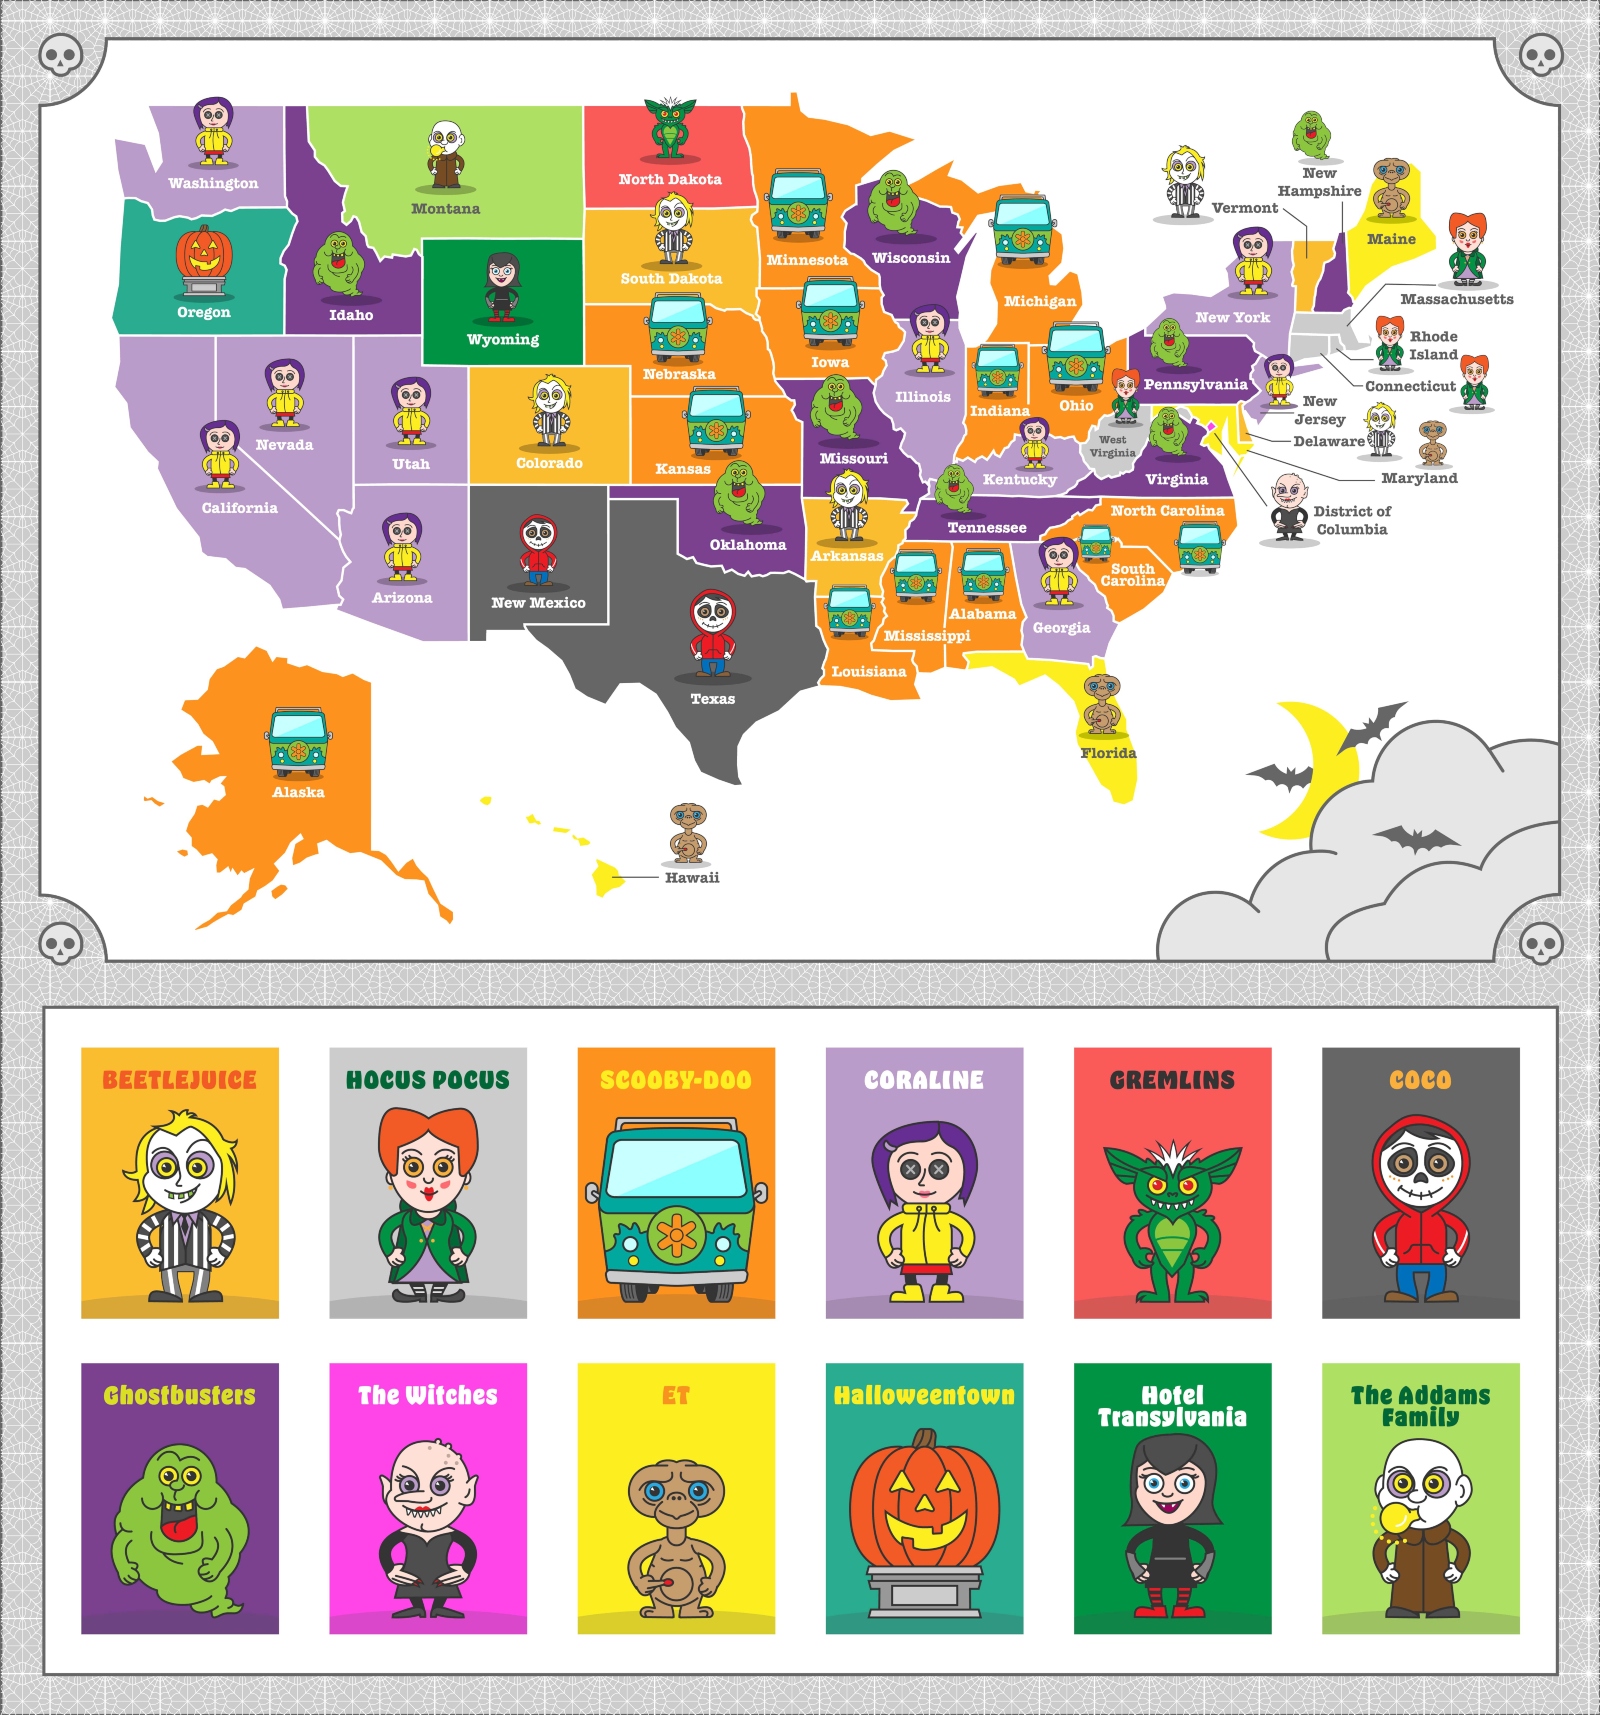 Halloween movie map key from US Dish